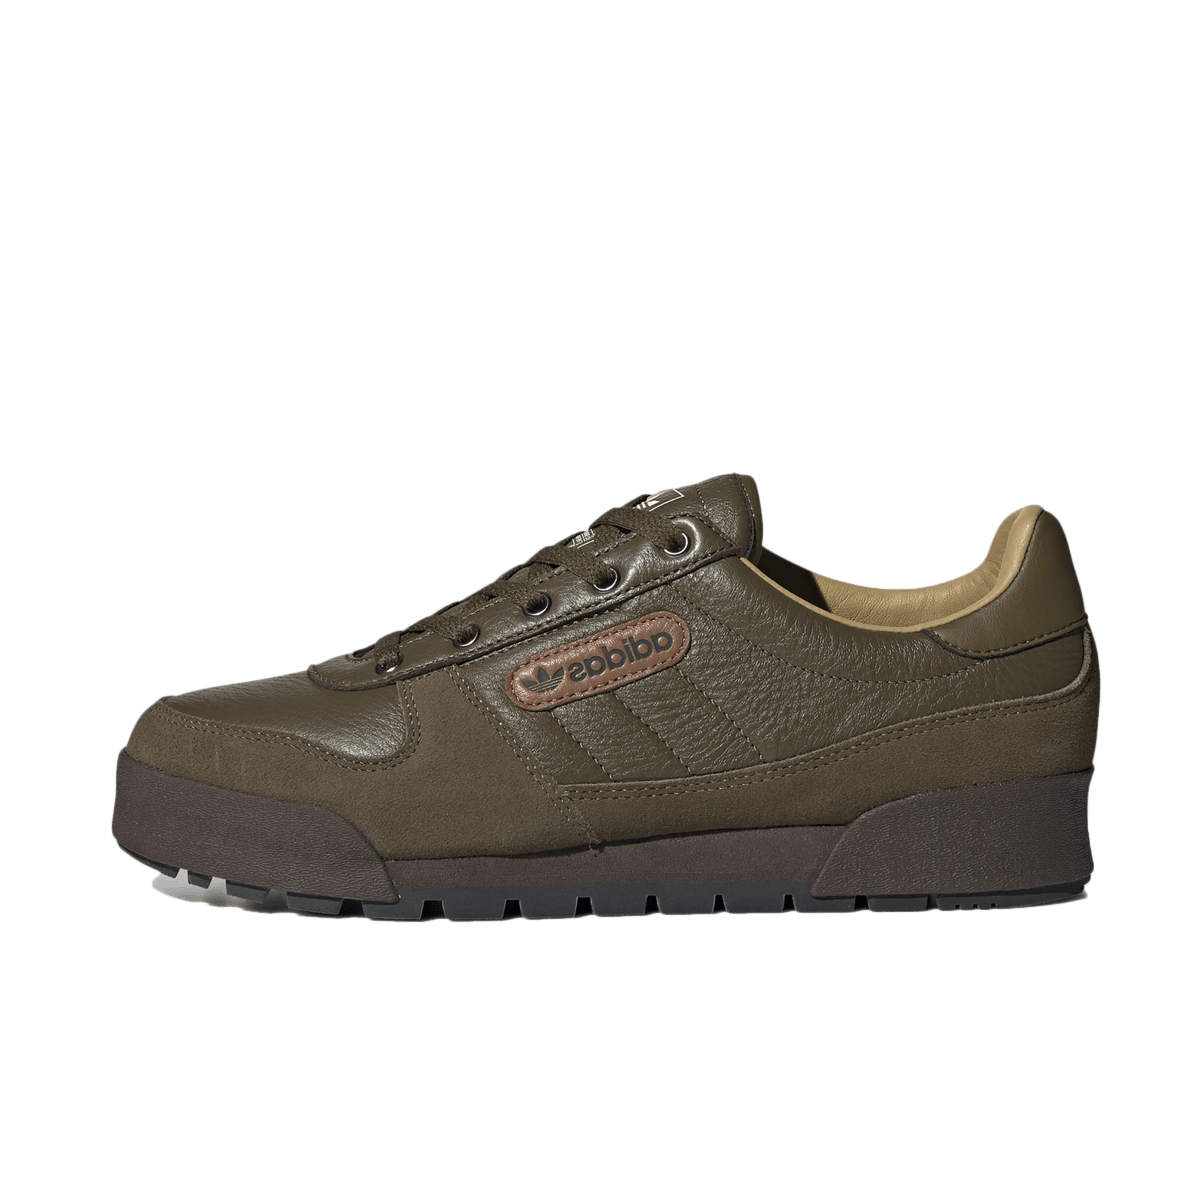 adidas Spezial Carnforth 'Trace Olive' GY5237